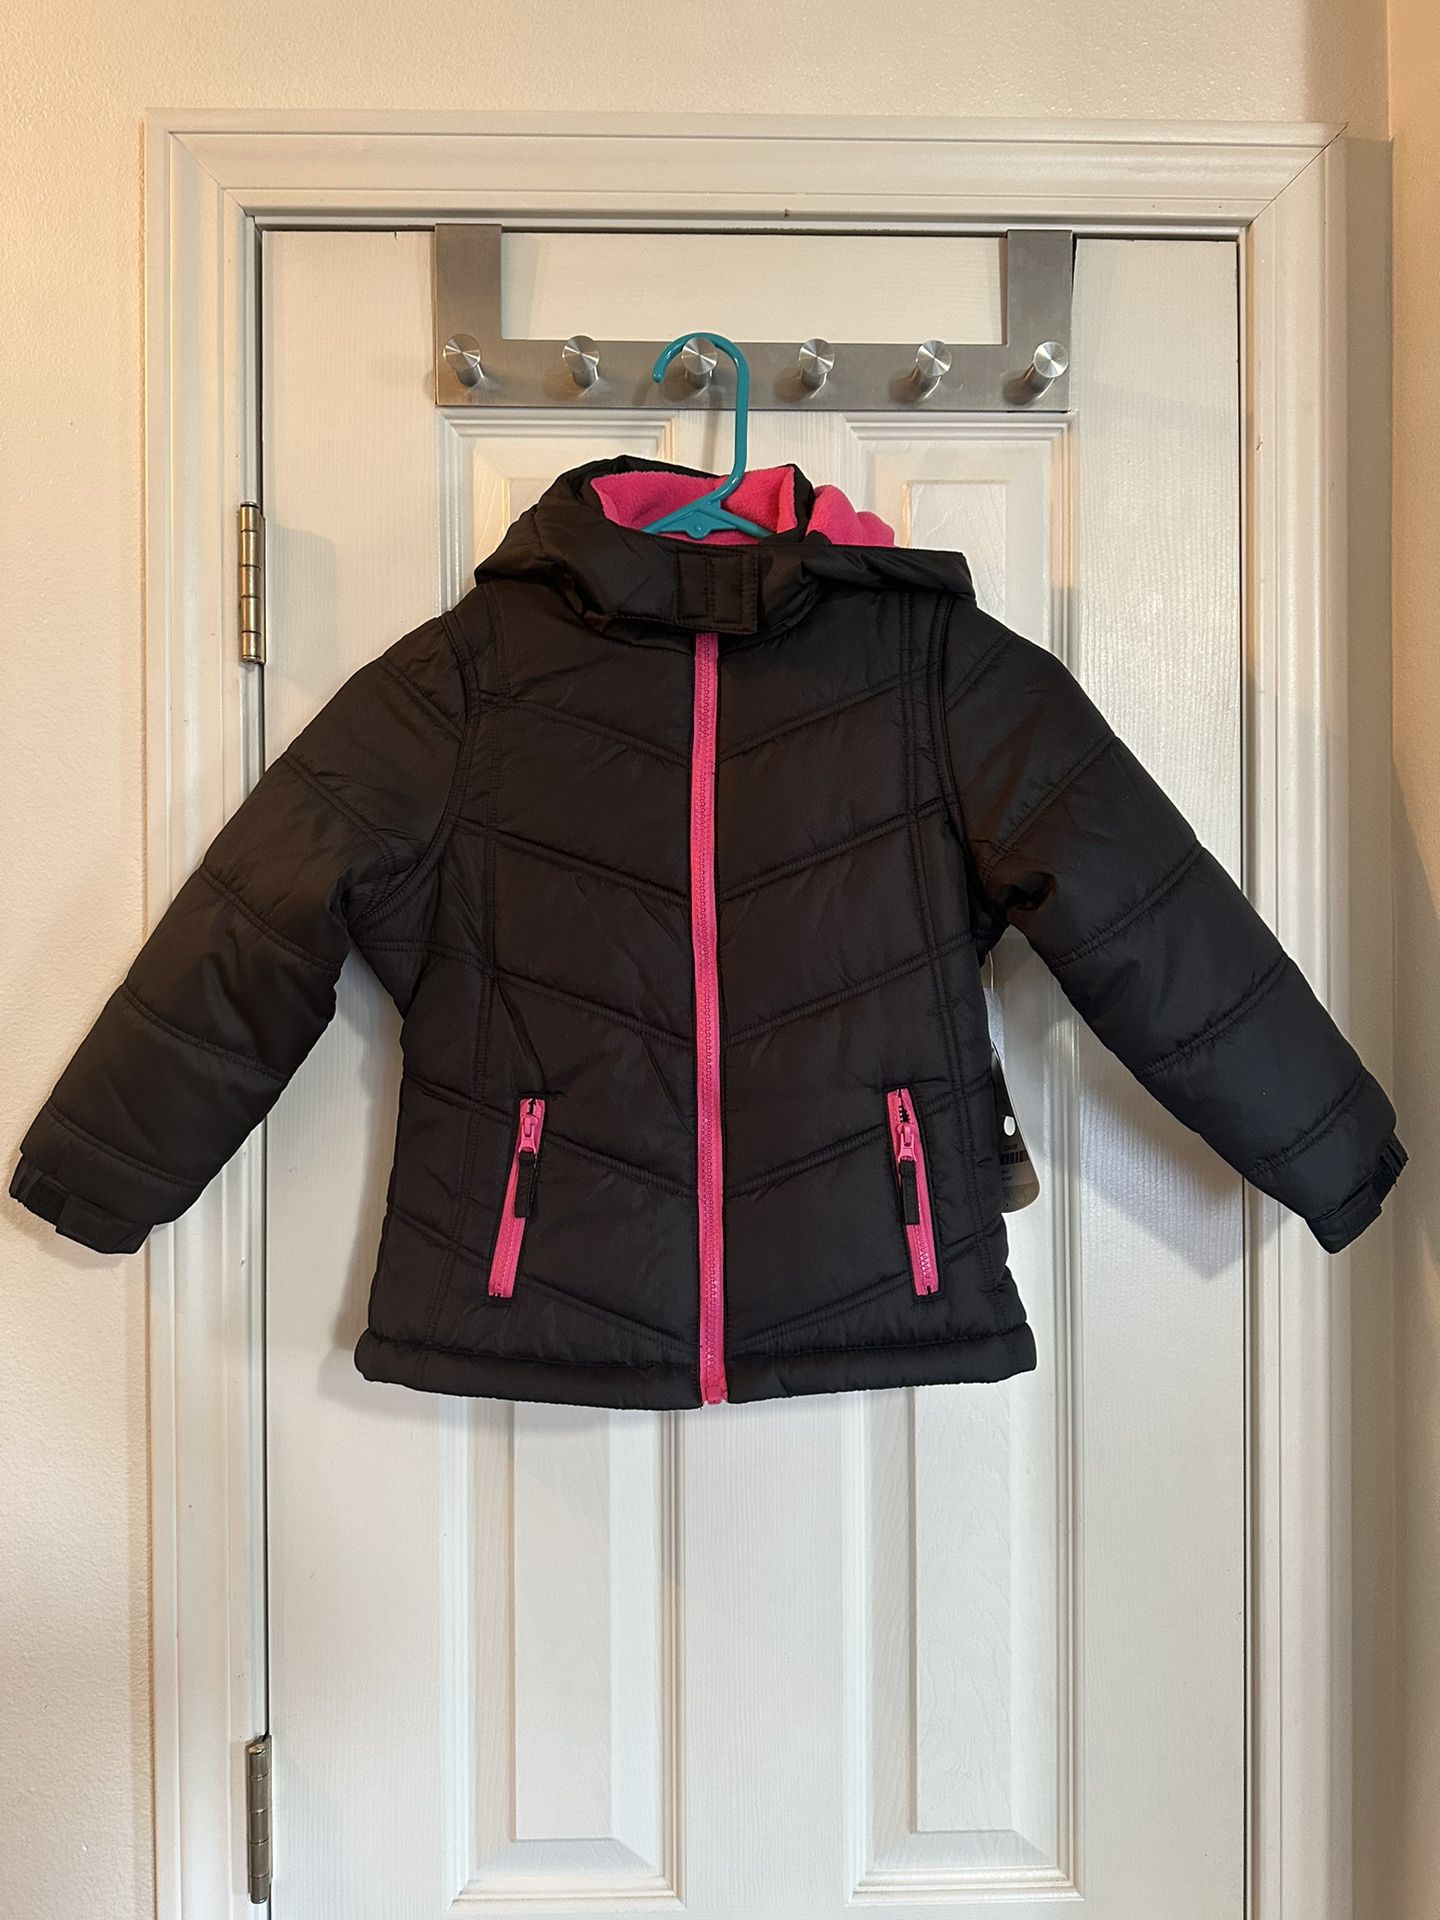 Little Girls Black And Pink Jacket Size 5/6 